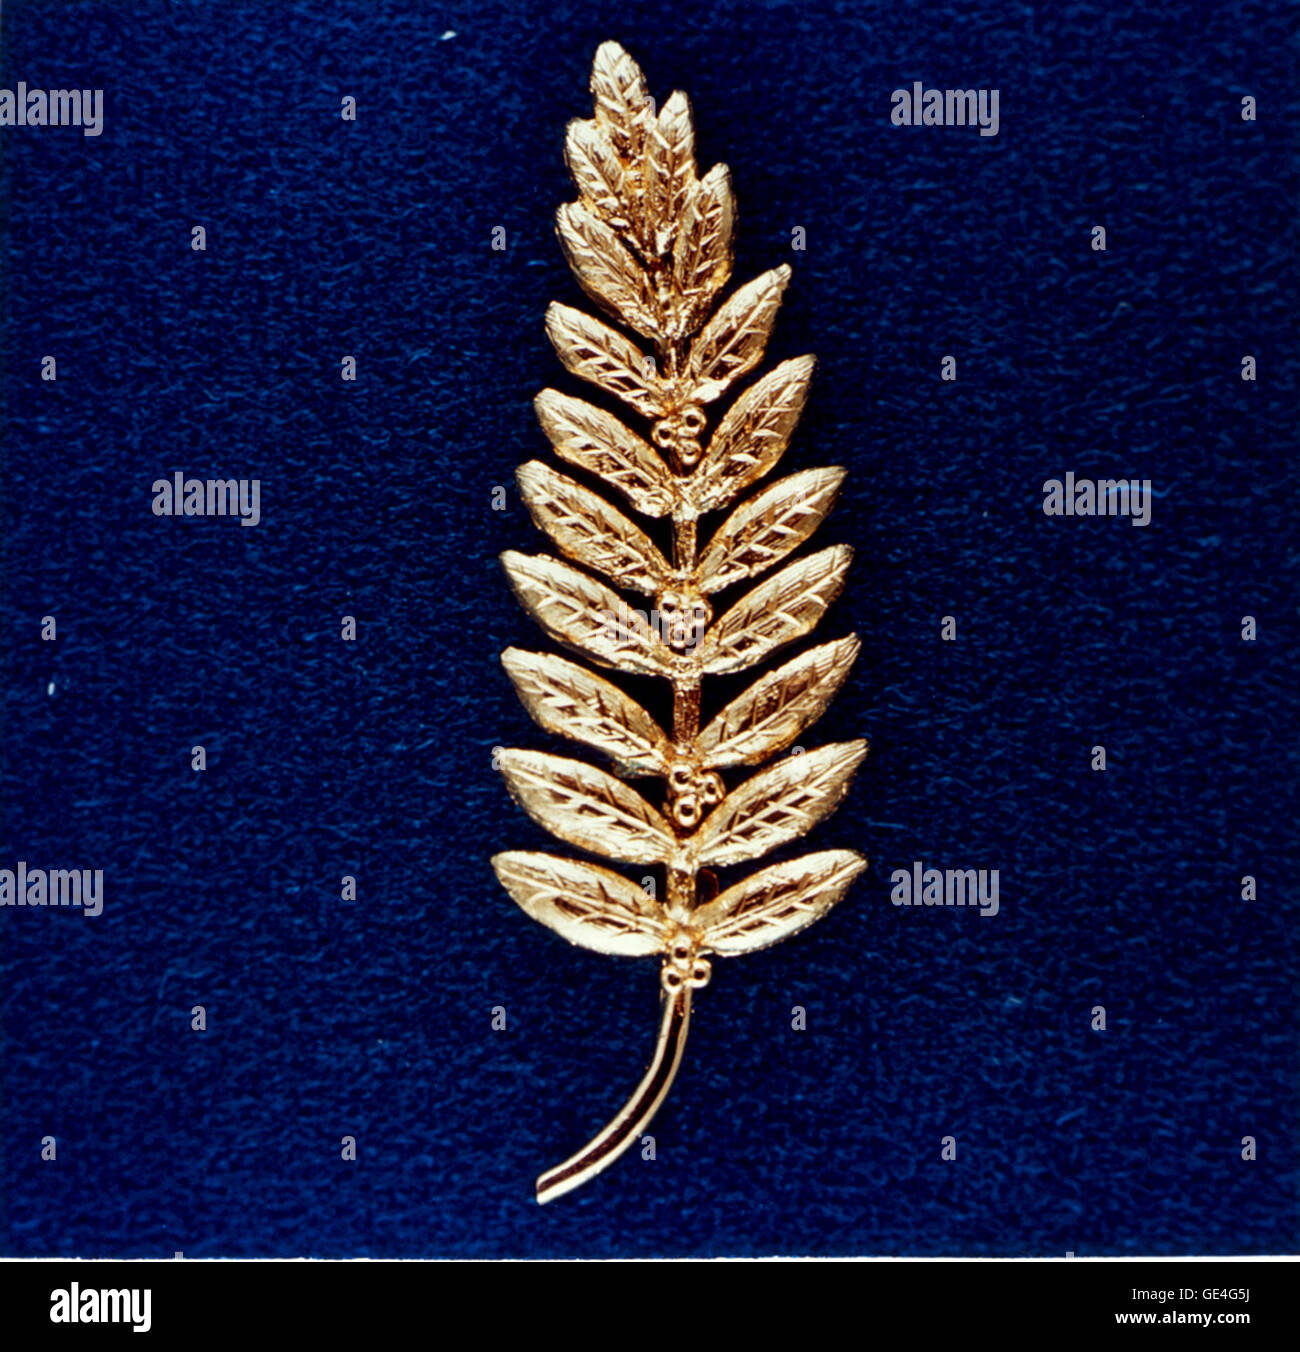 (July 20, 1969) This is the gold replica of an olive branch, the traditional symbol of peace, left on the Moon's surface by Apollo 11 crewmembers. Astronaut Neil A. Armstrong, commander, placed the small replica (less than half a foot in length) on the Moon. The gesture represented a wish for peace for all mankind.  Image # : 71-HC-602 Stock Photo